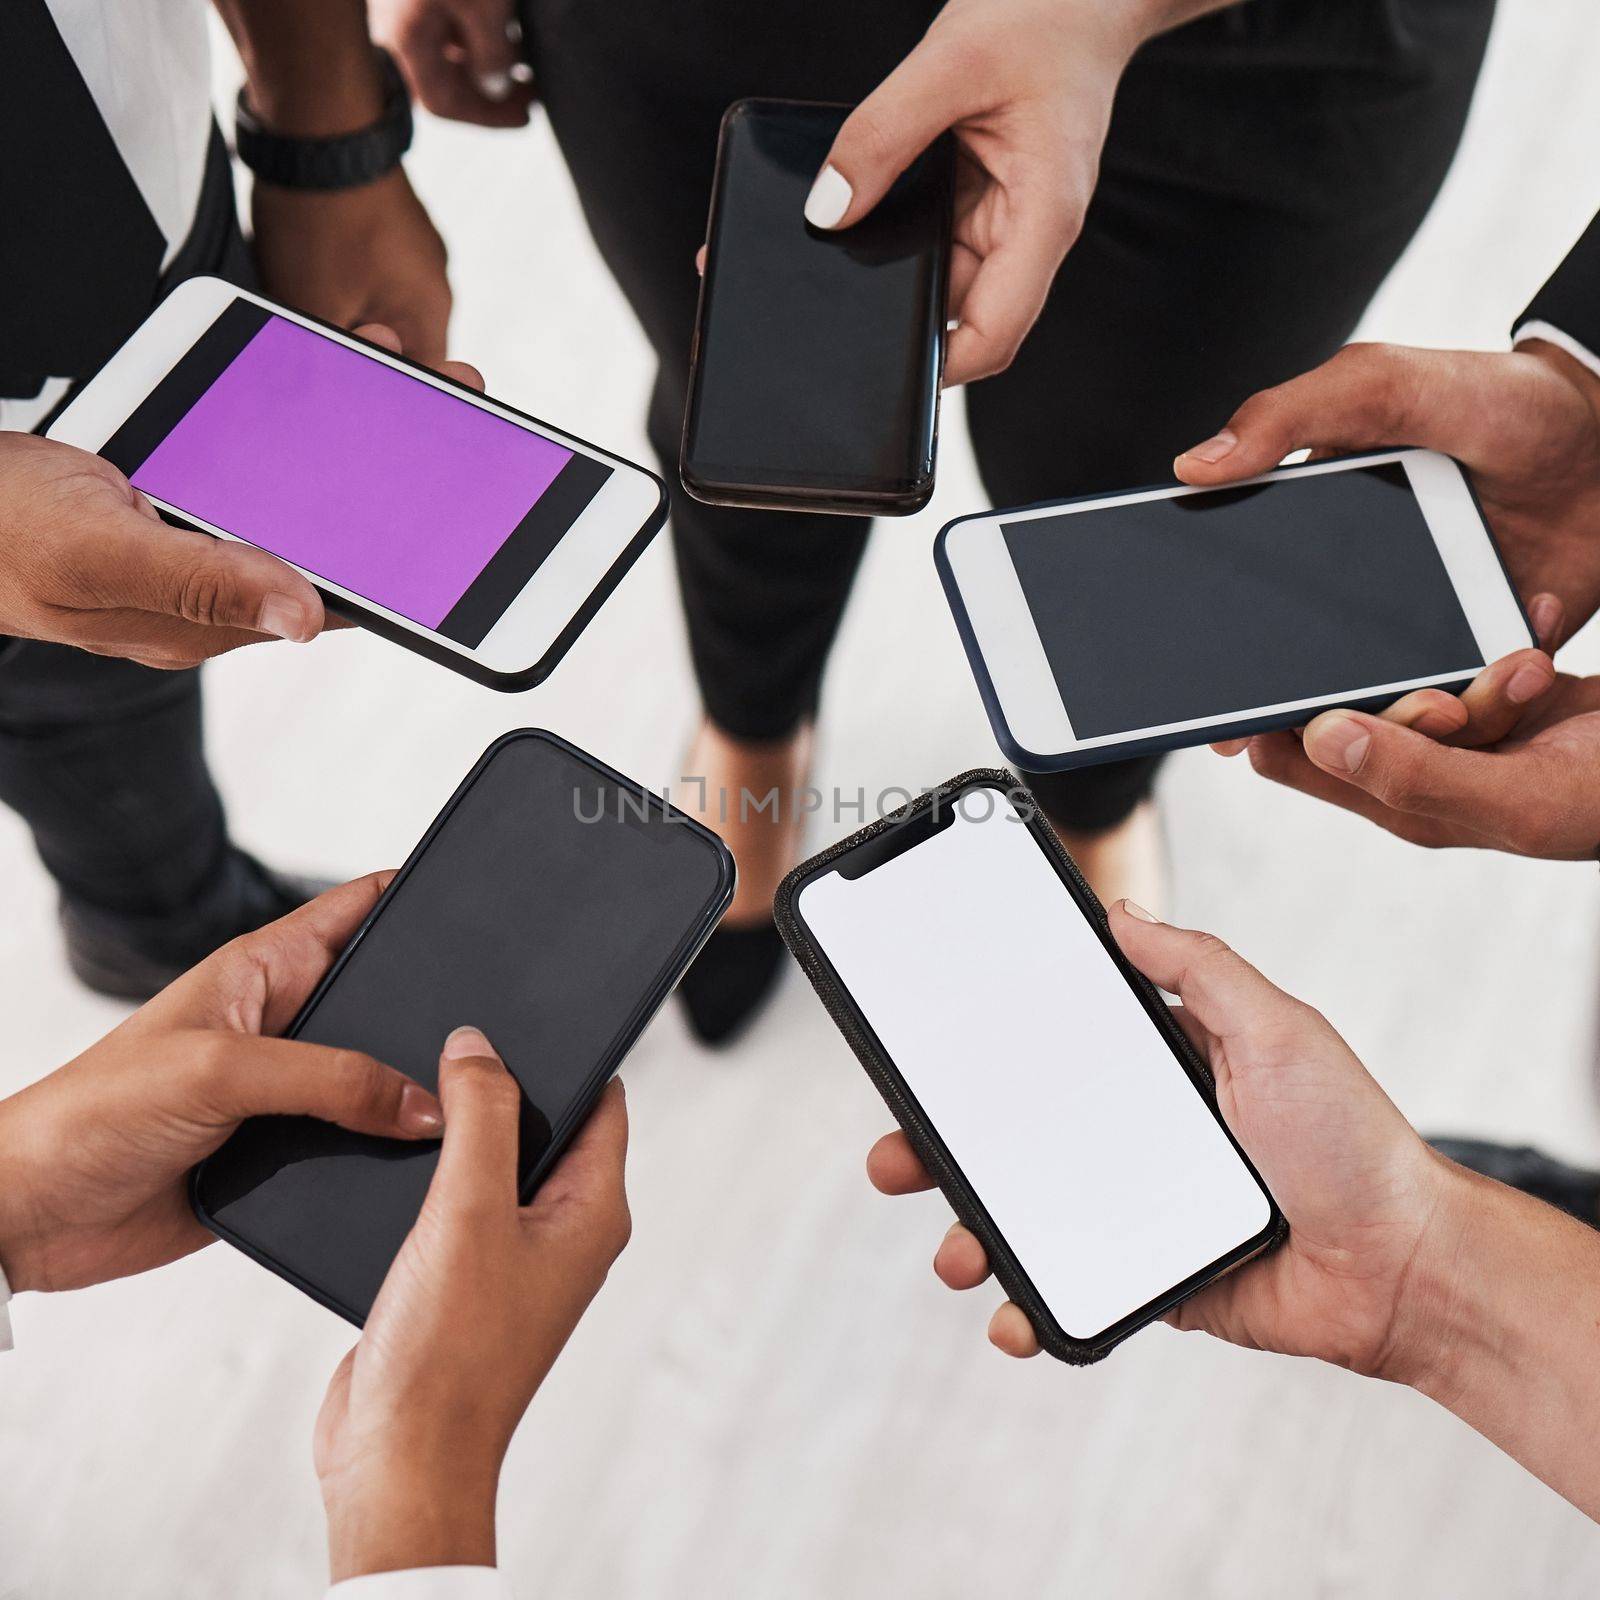 Group of people, hands and phone screen circle for marketing mockup, advertising or online networking. Blank smartphone, business people hand and teamwork digital communication or web tech meeting.